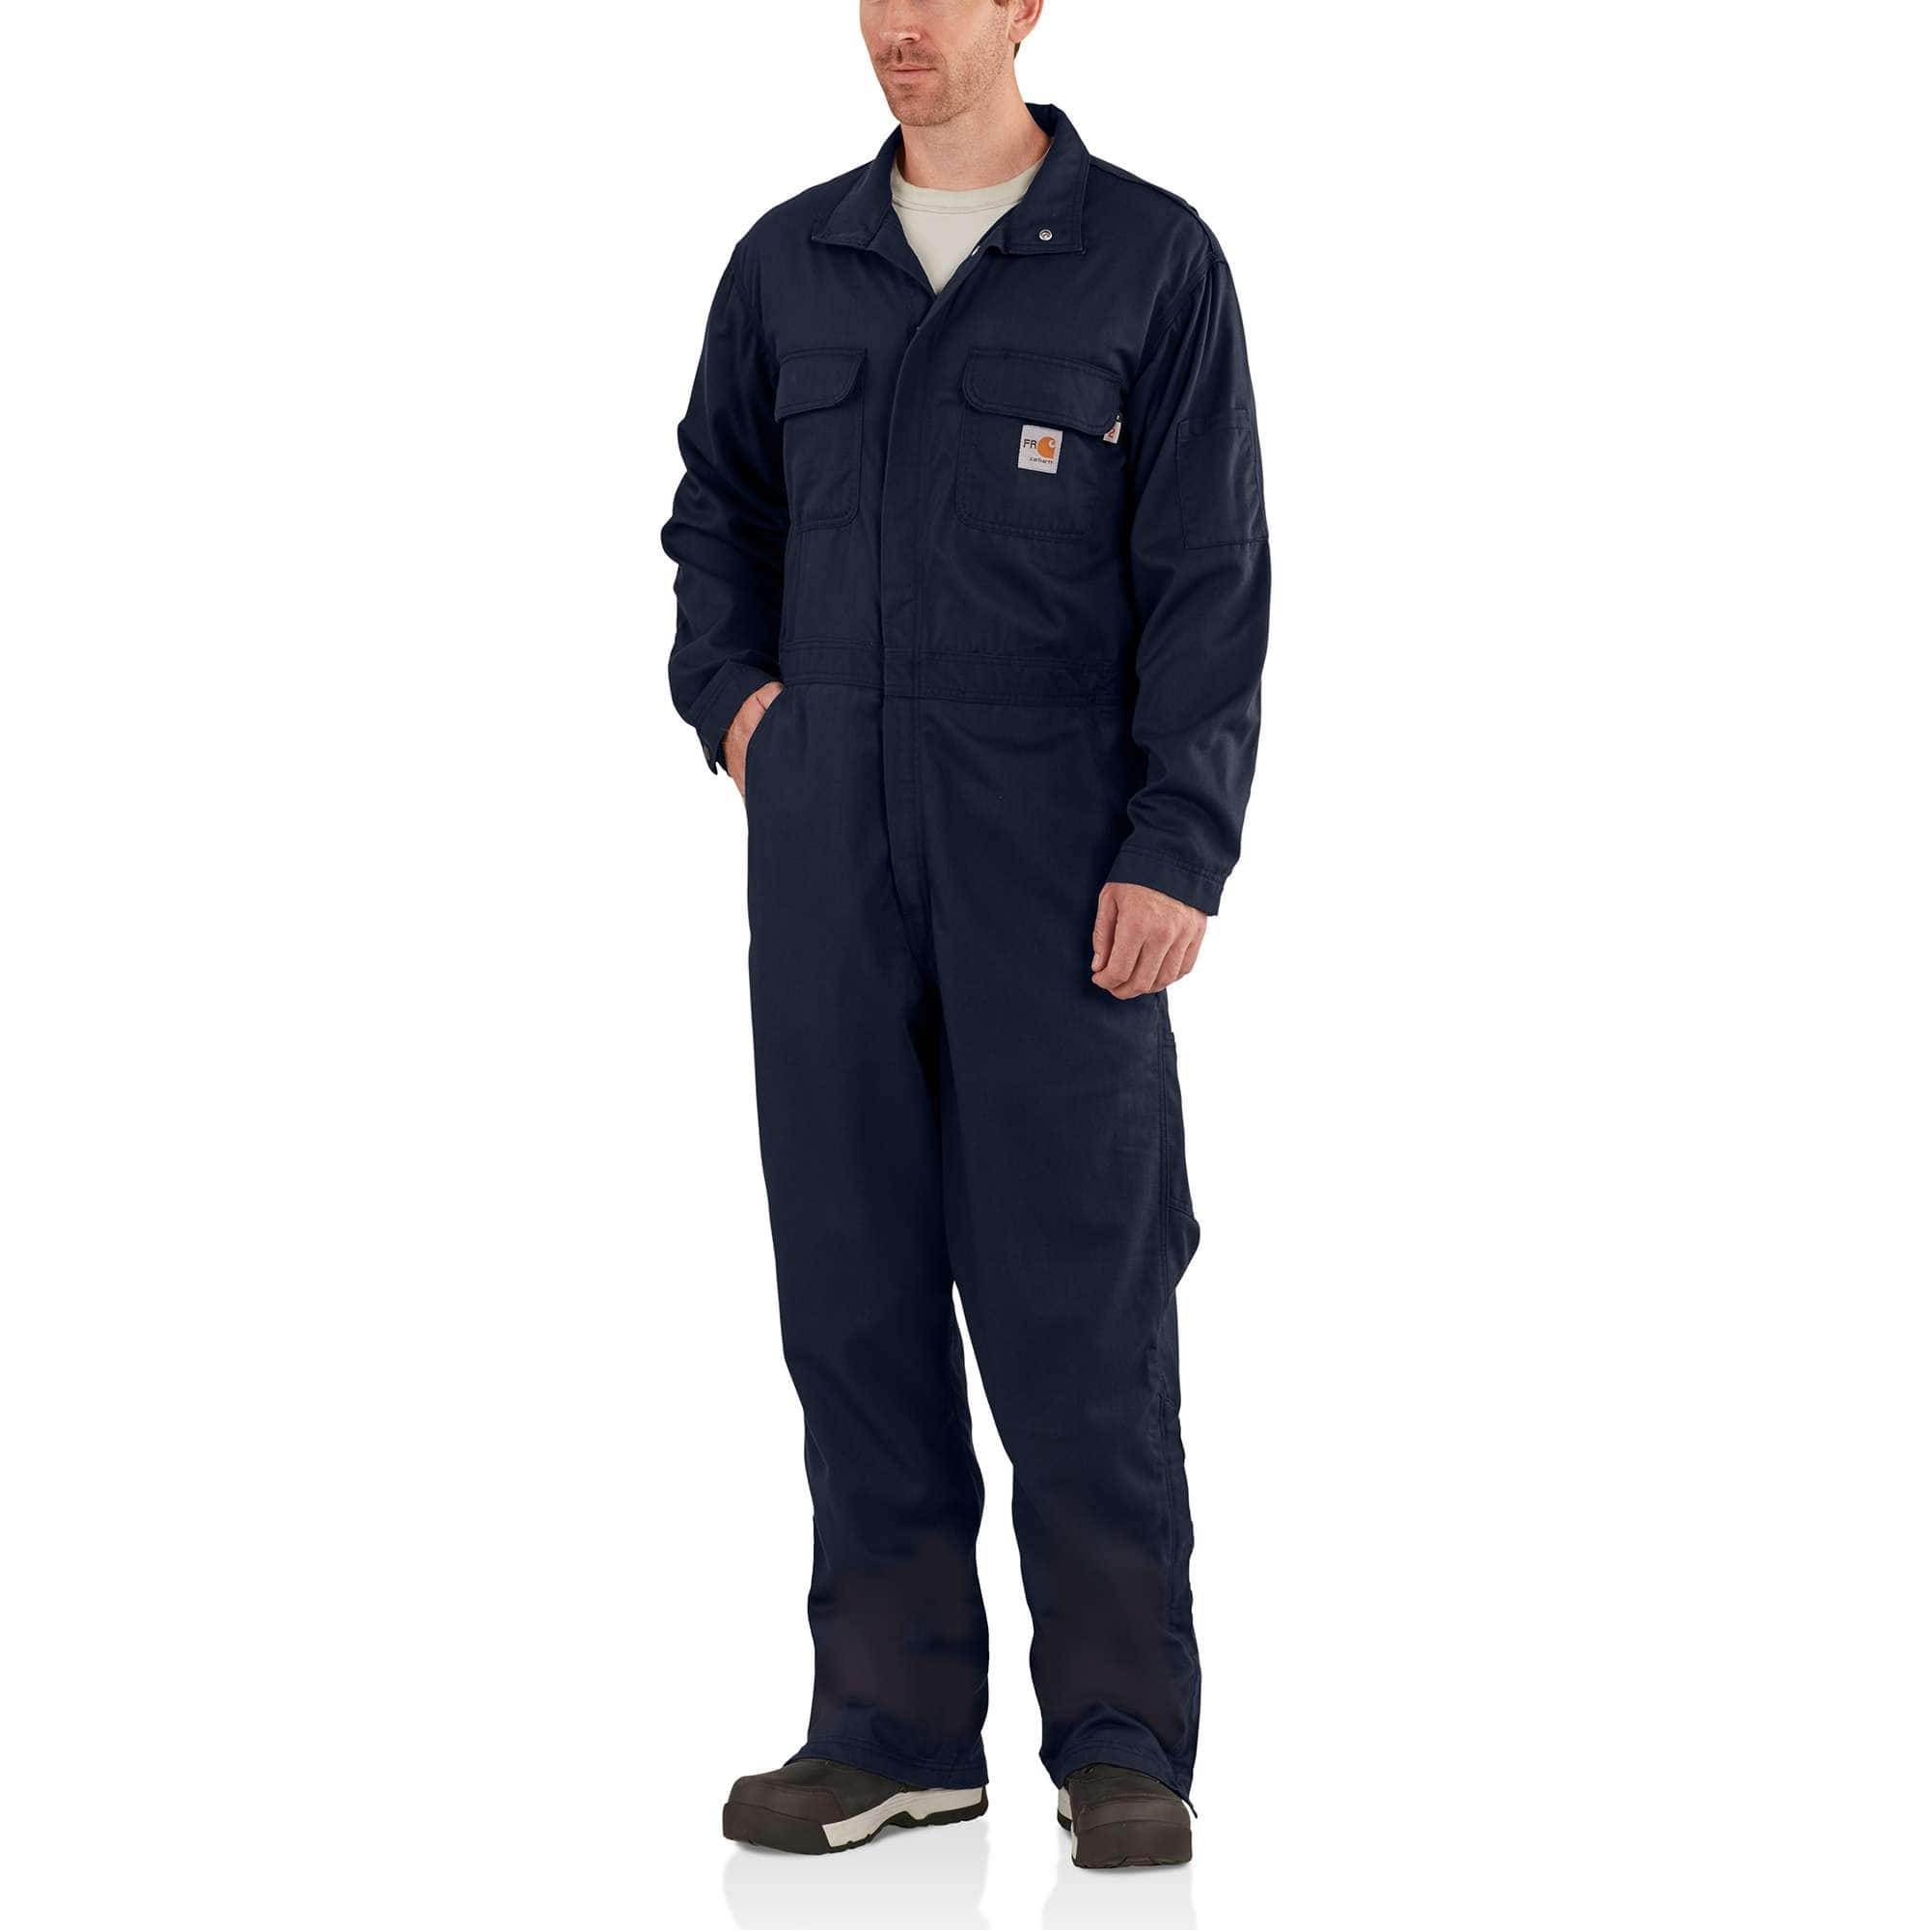 Men's Flame-Resistant Deluxe Coverall 102150 | Carhartt